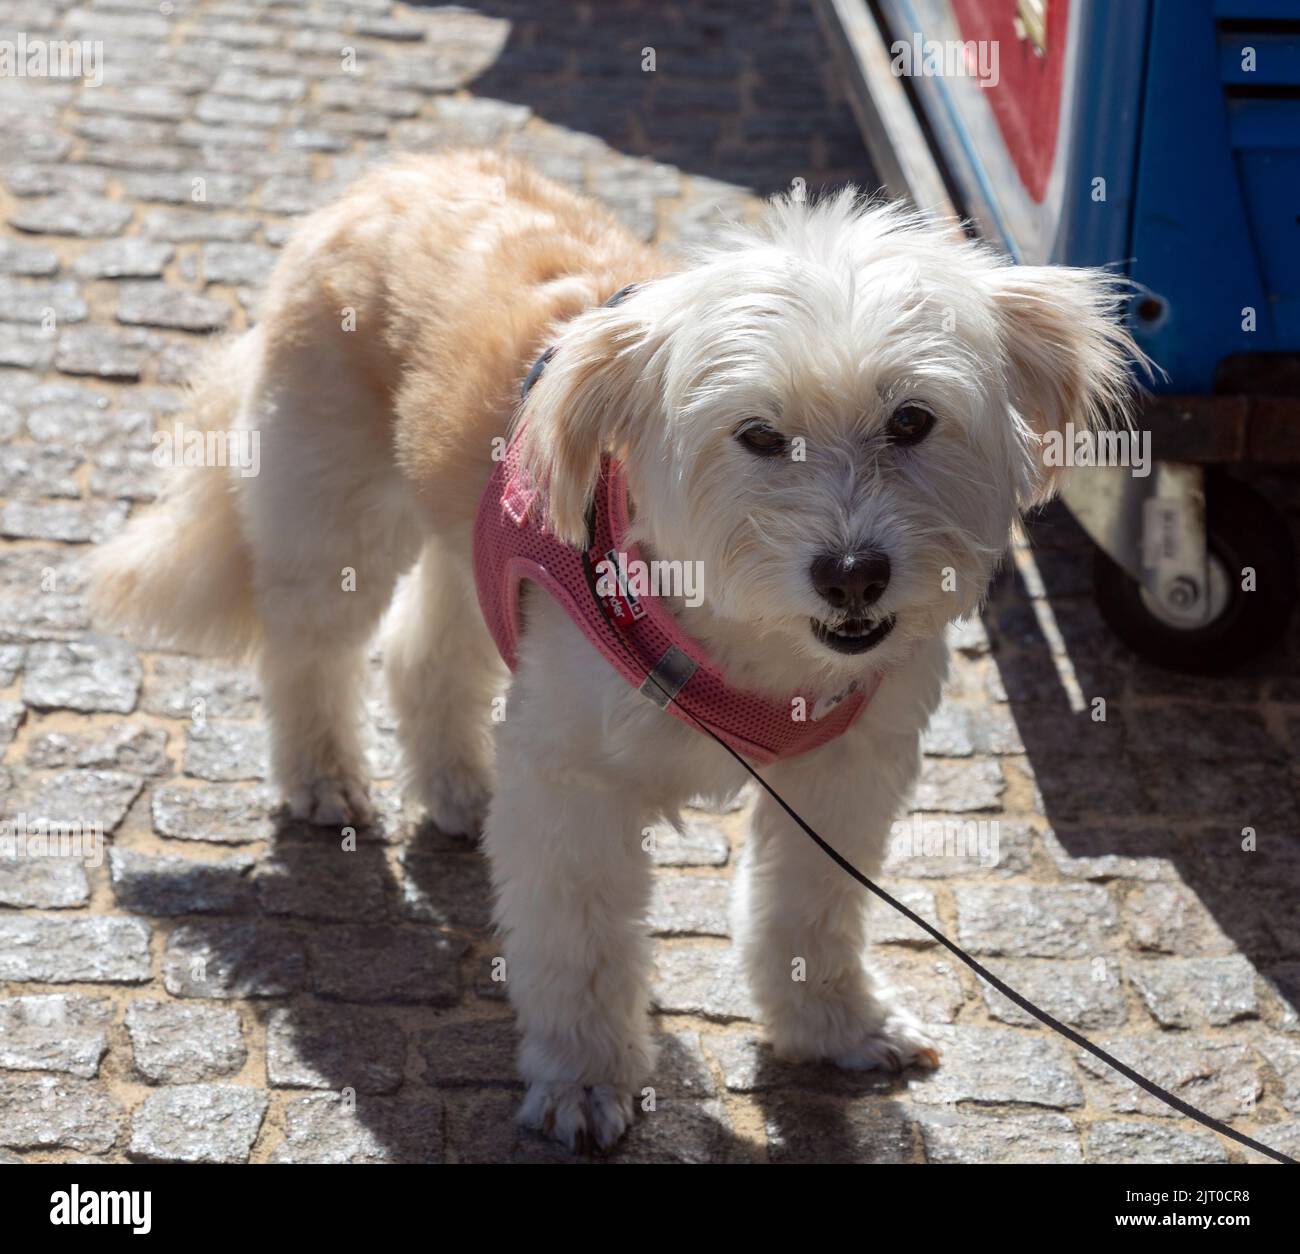 A Small Dog Outside the Cathedral Of Santiago De Compostela Galicia Spain Stock Photo